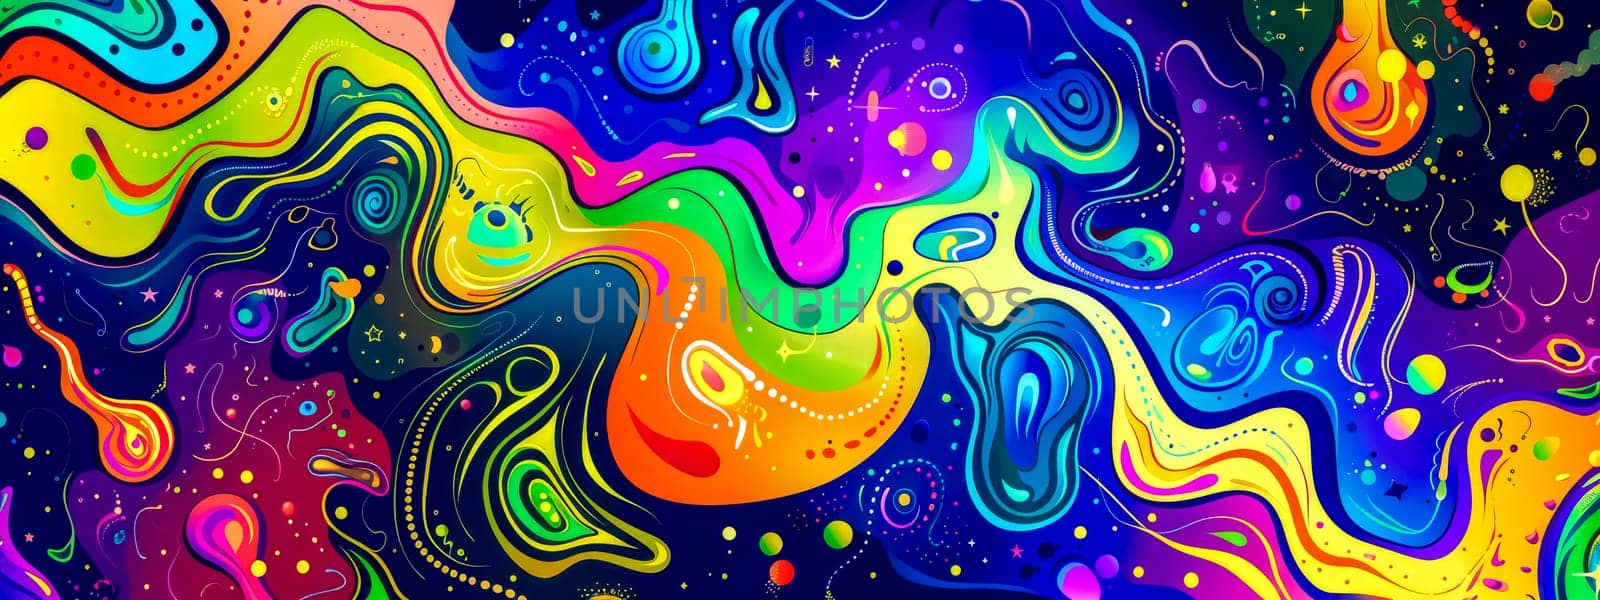 Colorful illustration featuring psychedelic patterns and space motifs, ideal for backgrounds